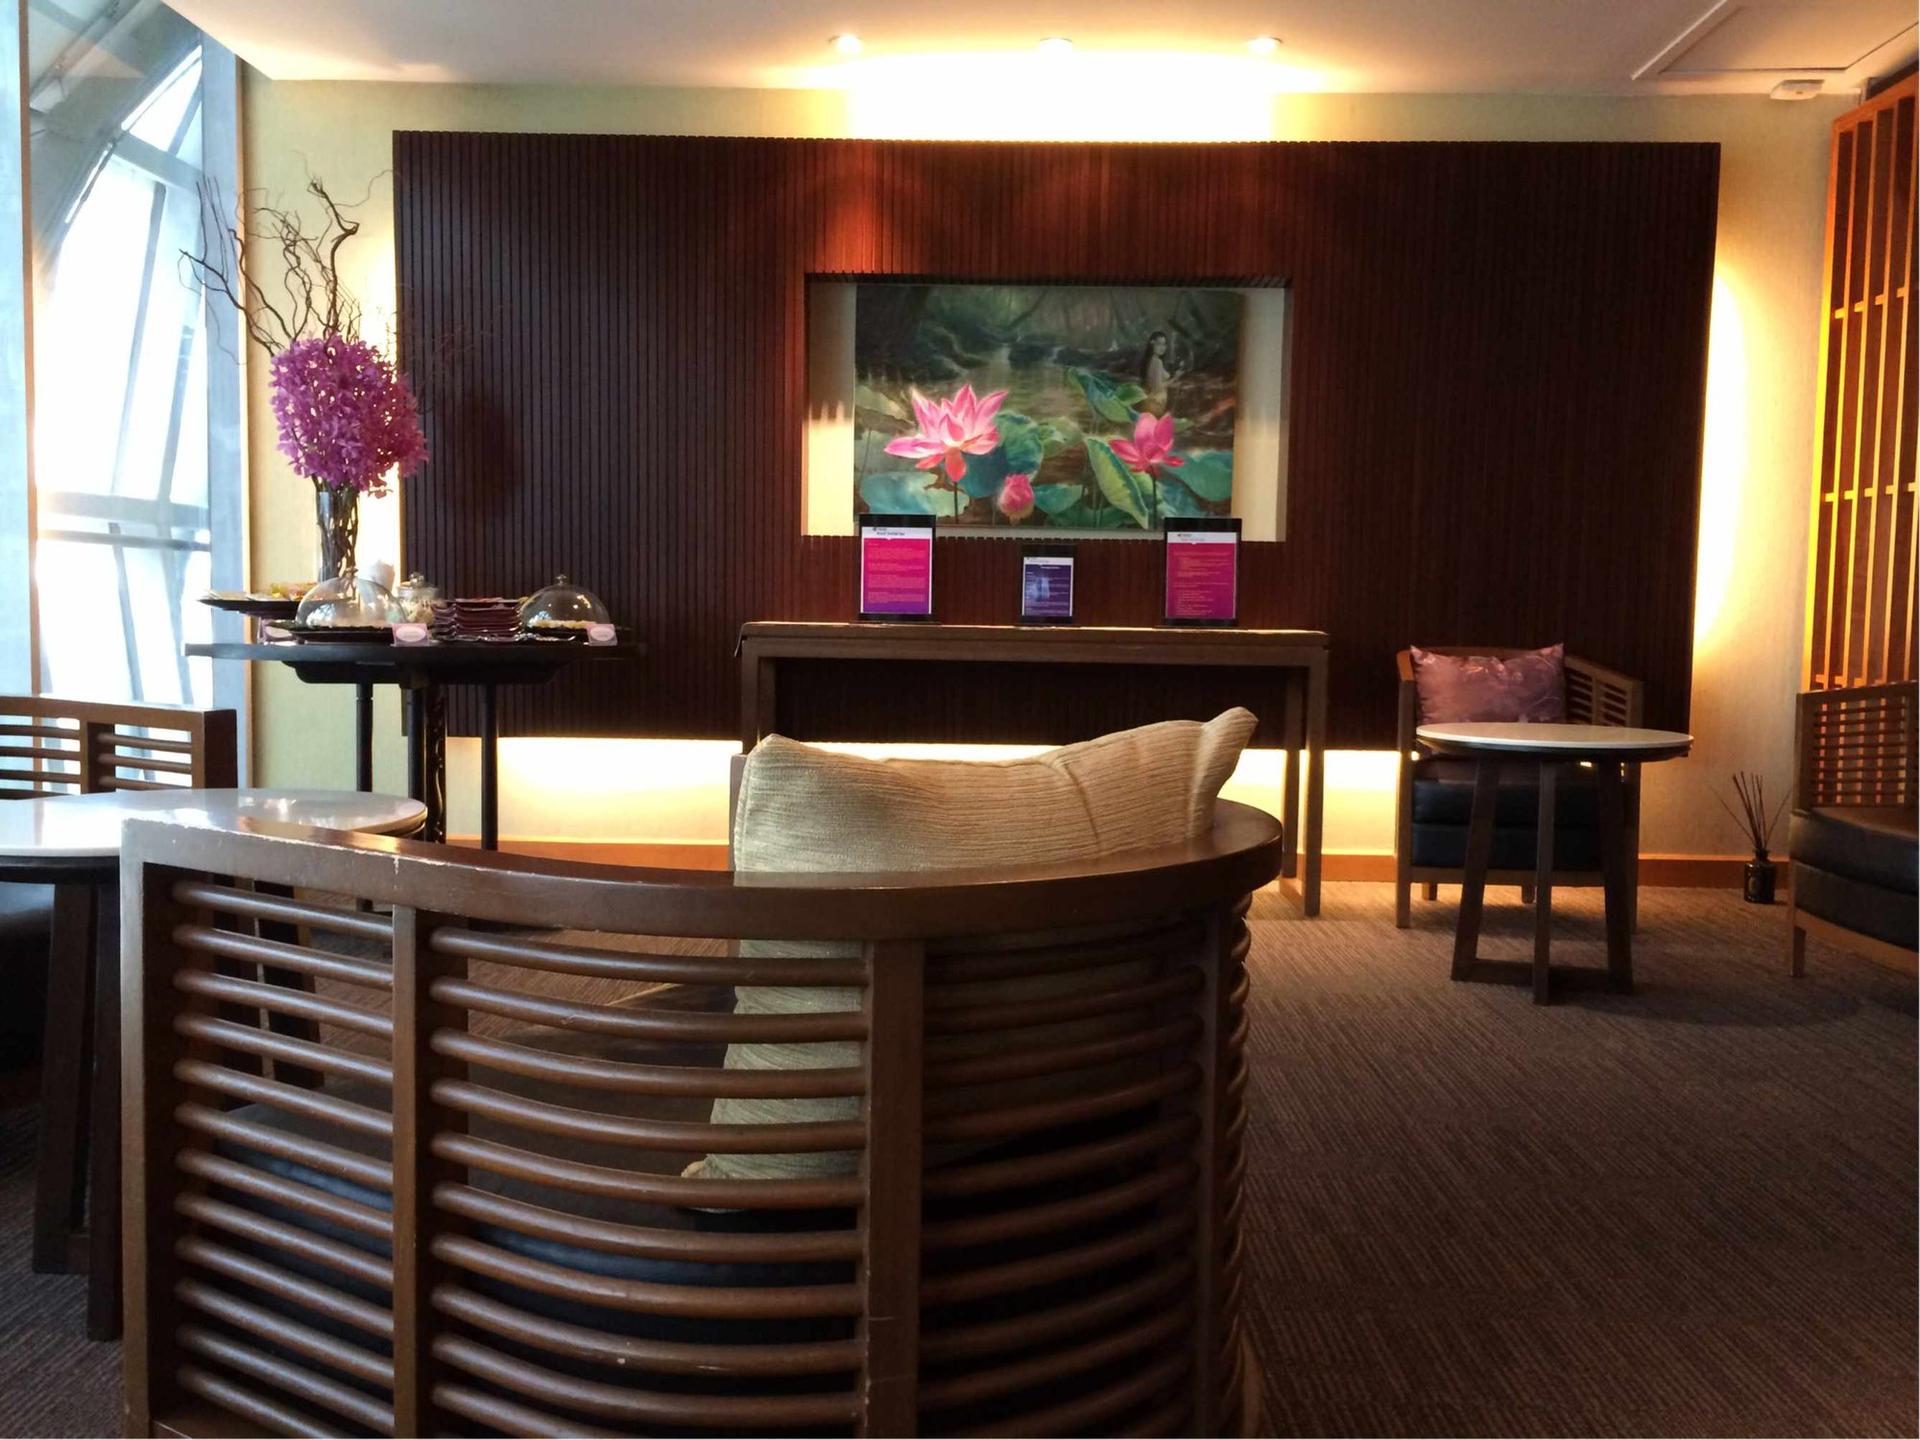 Thai Airways Royal Orchid Spa  image 9 of 25